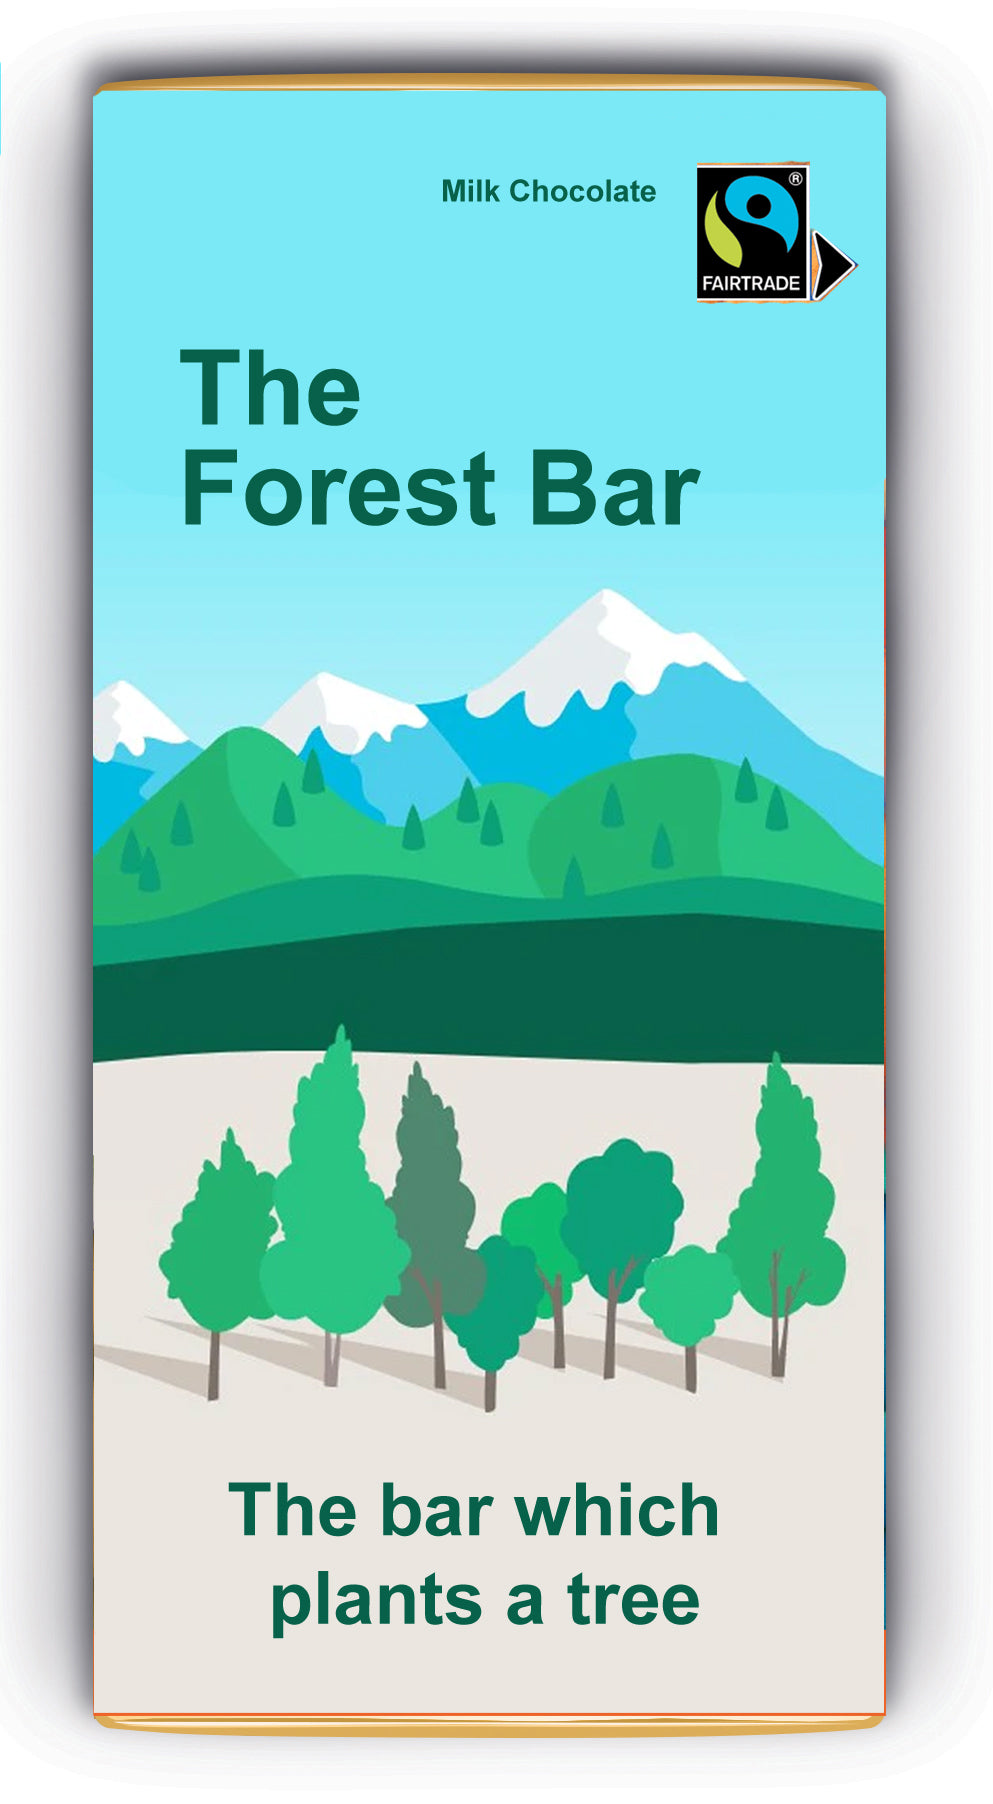 The Forest Bar launches